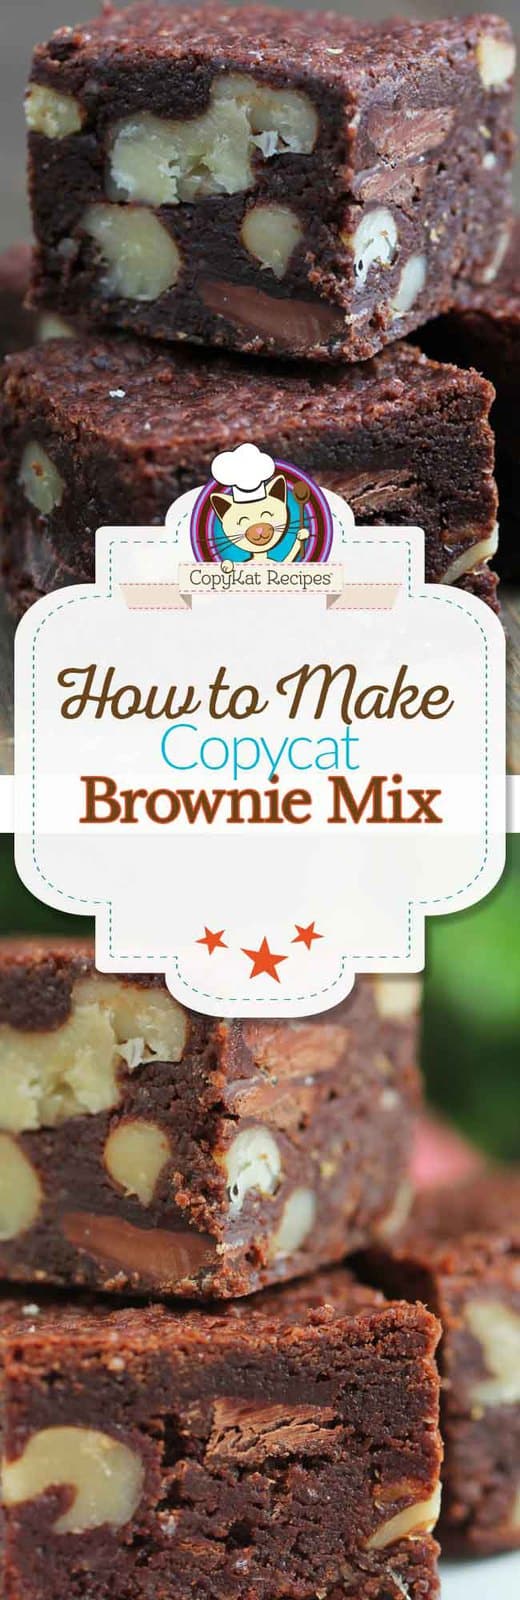 Make homemade brownie mix for the best brownies ever.   